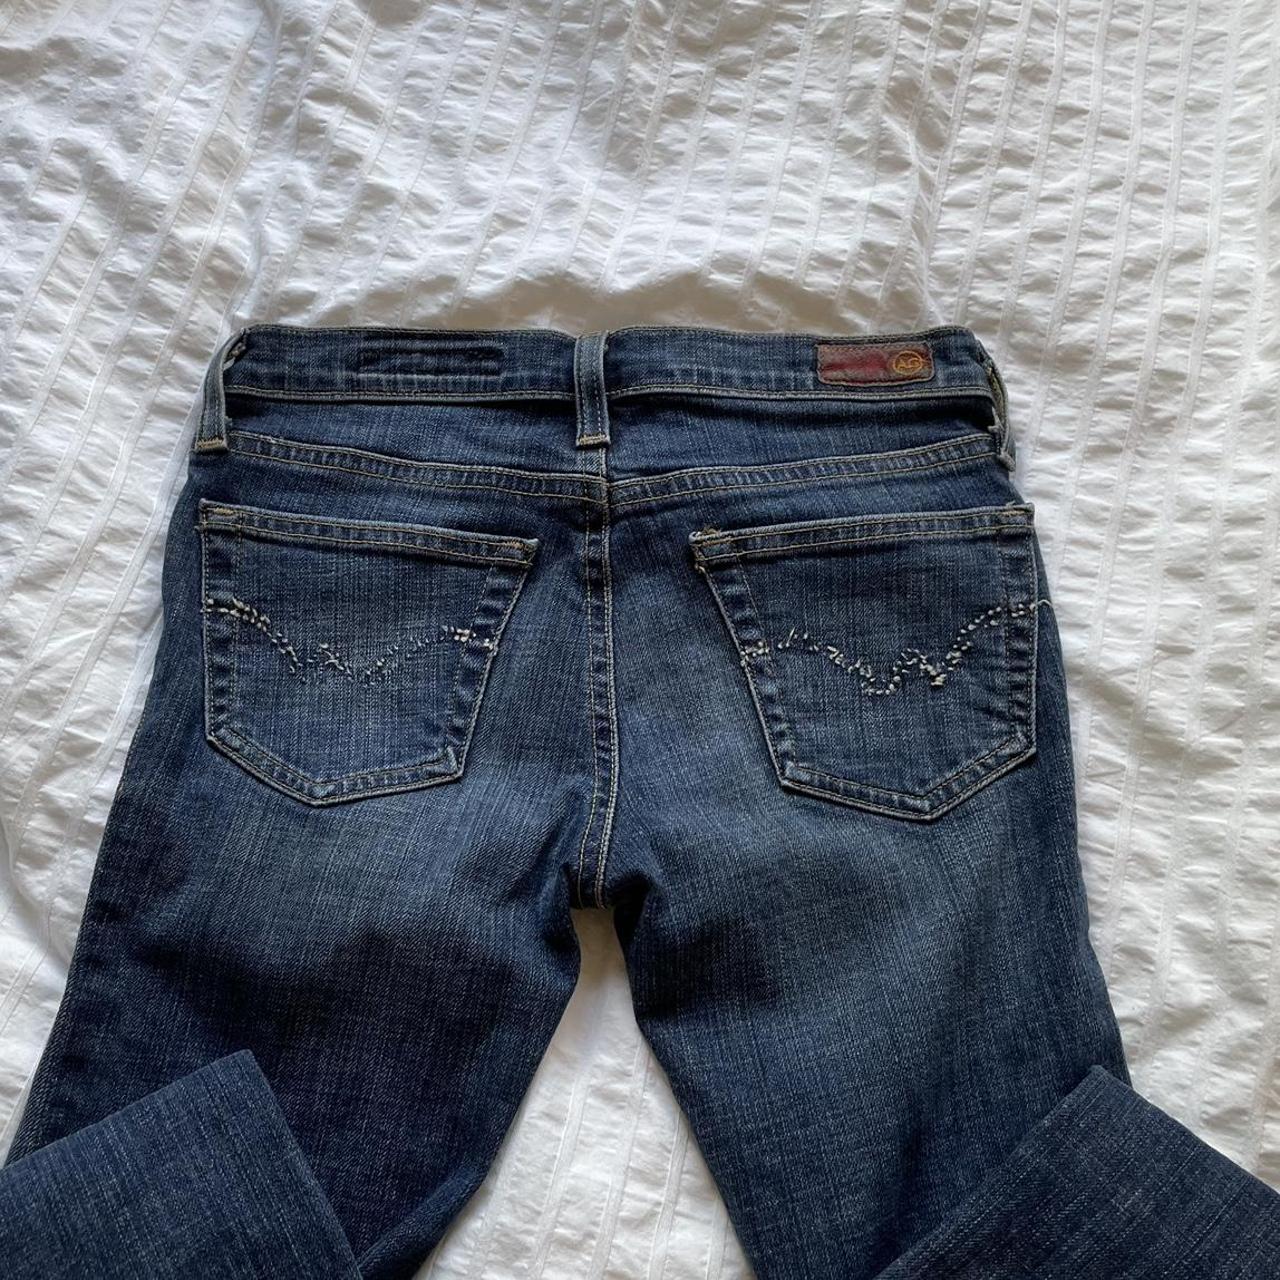 AG Jeans Women's Blue and Navy Jeans | Depop